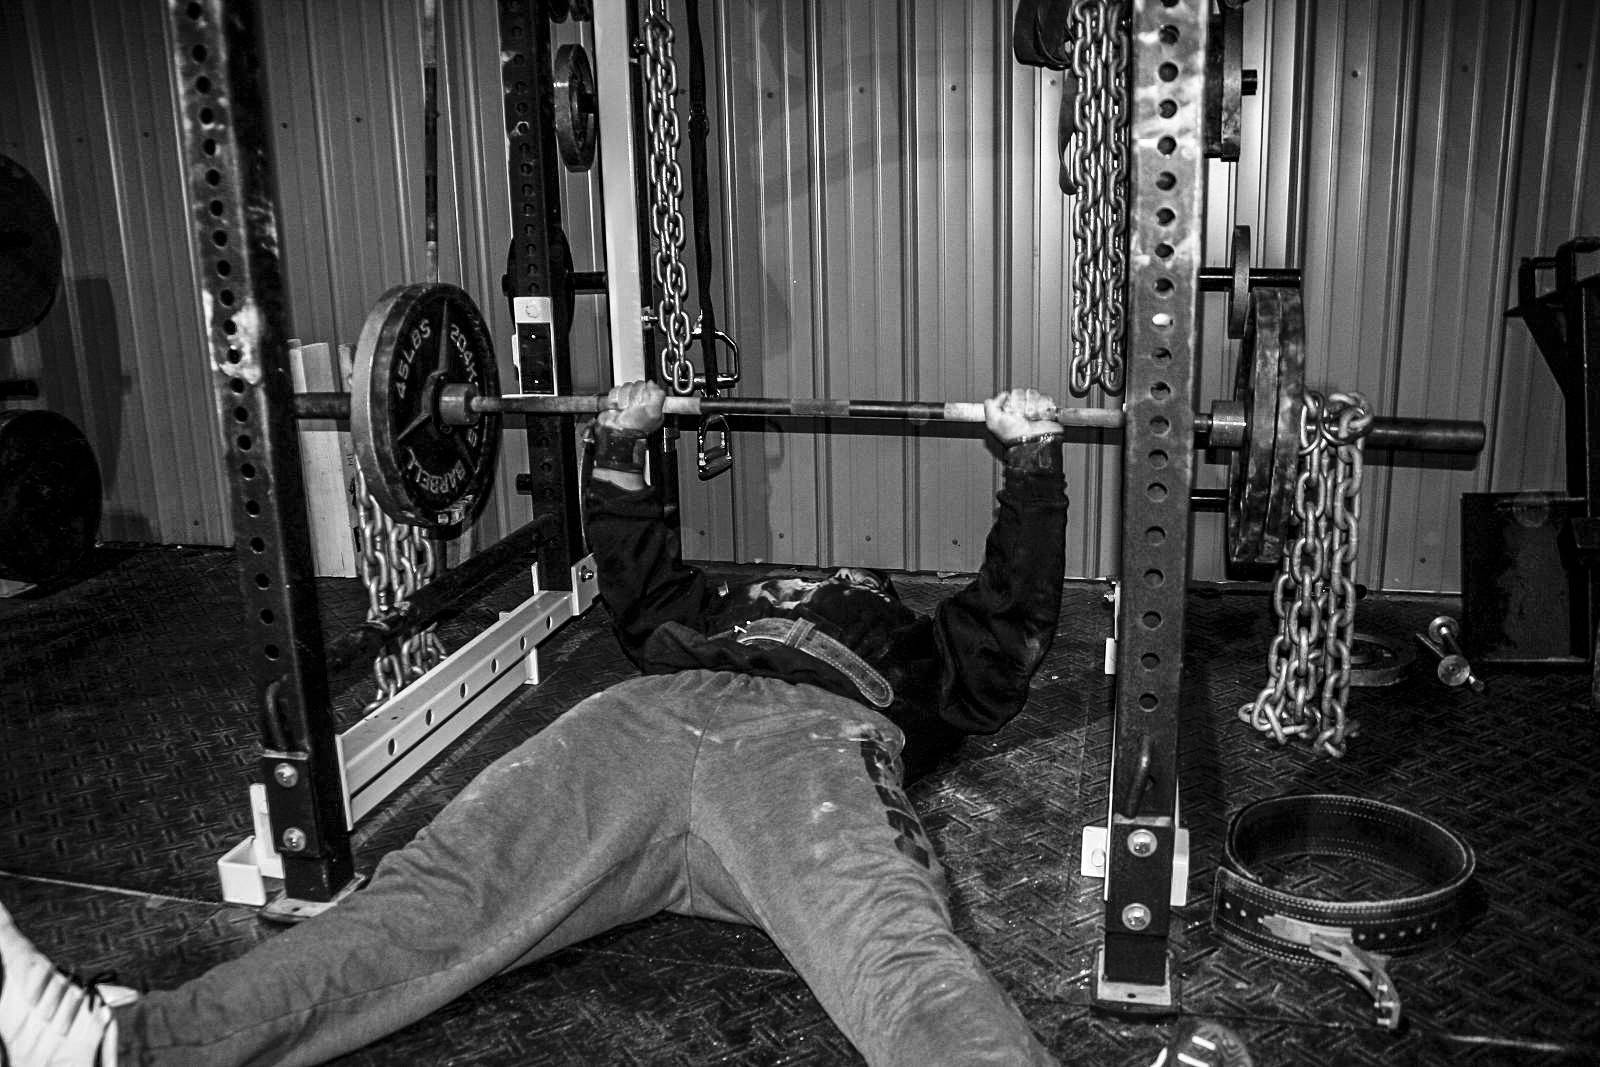 Conjuphasic Wk2 ME Upper: Floor Press and Chains